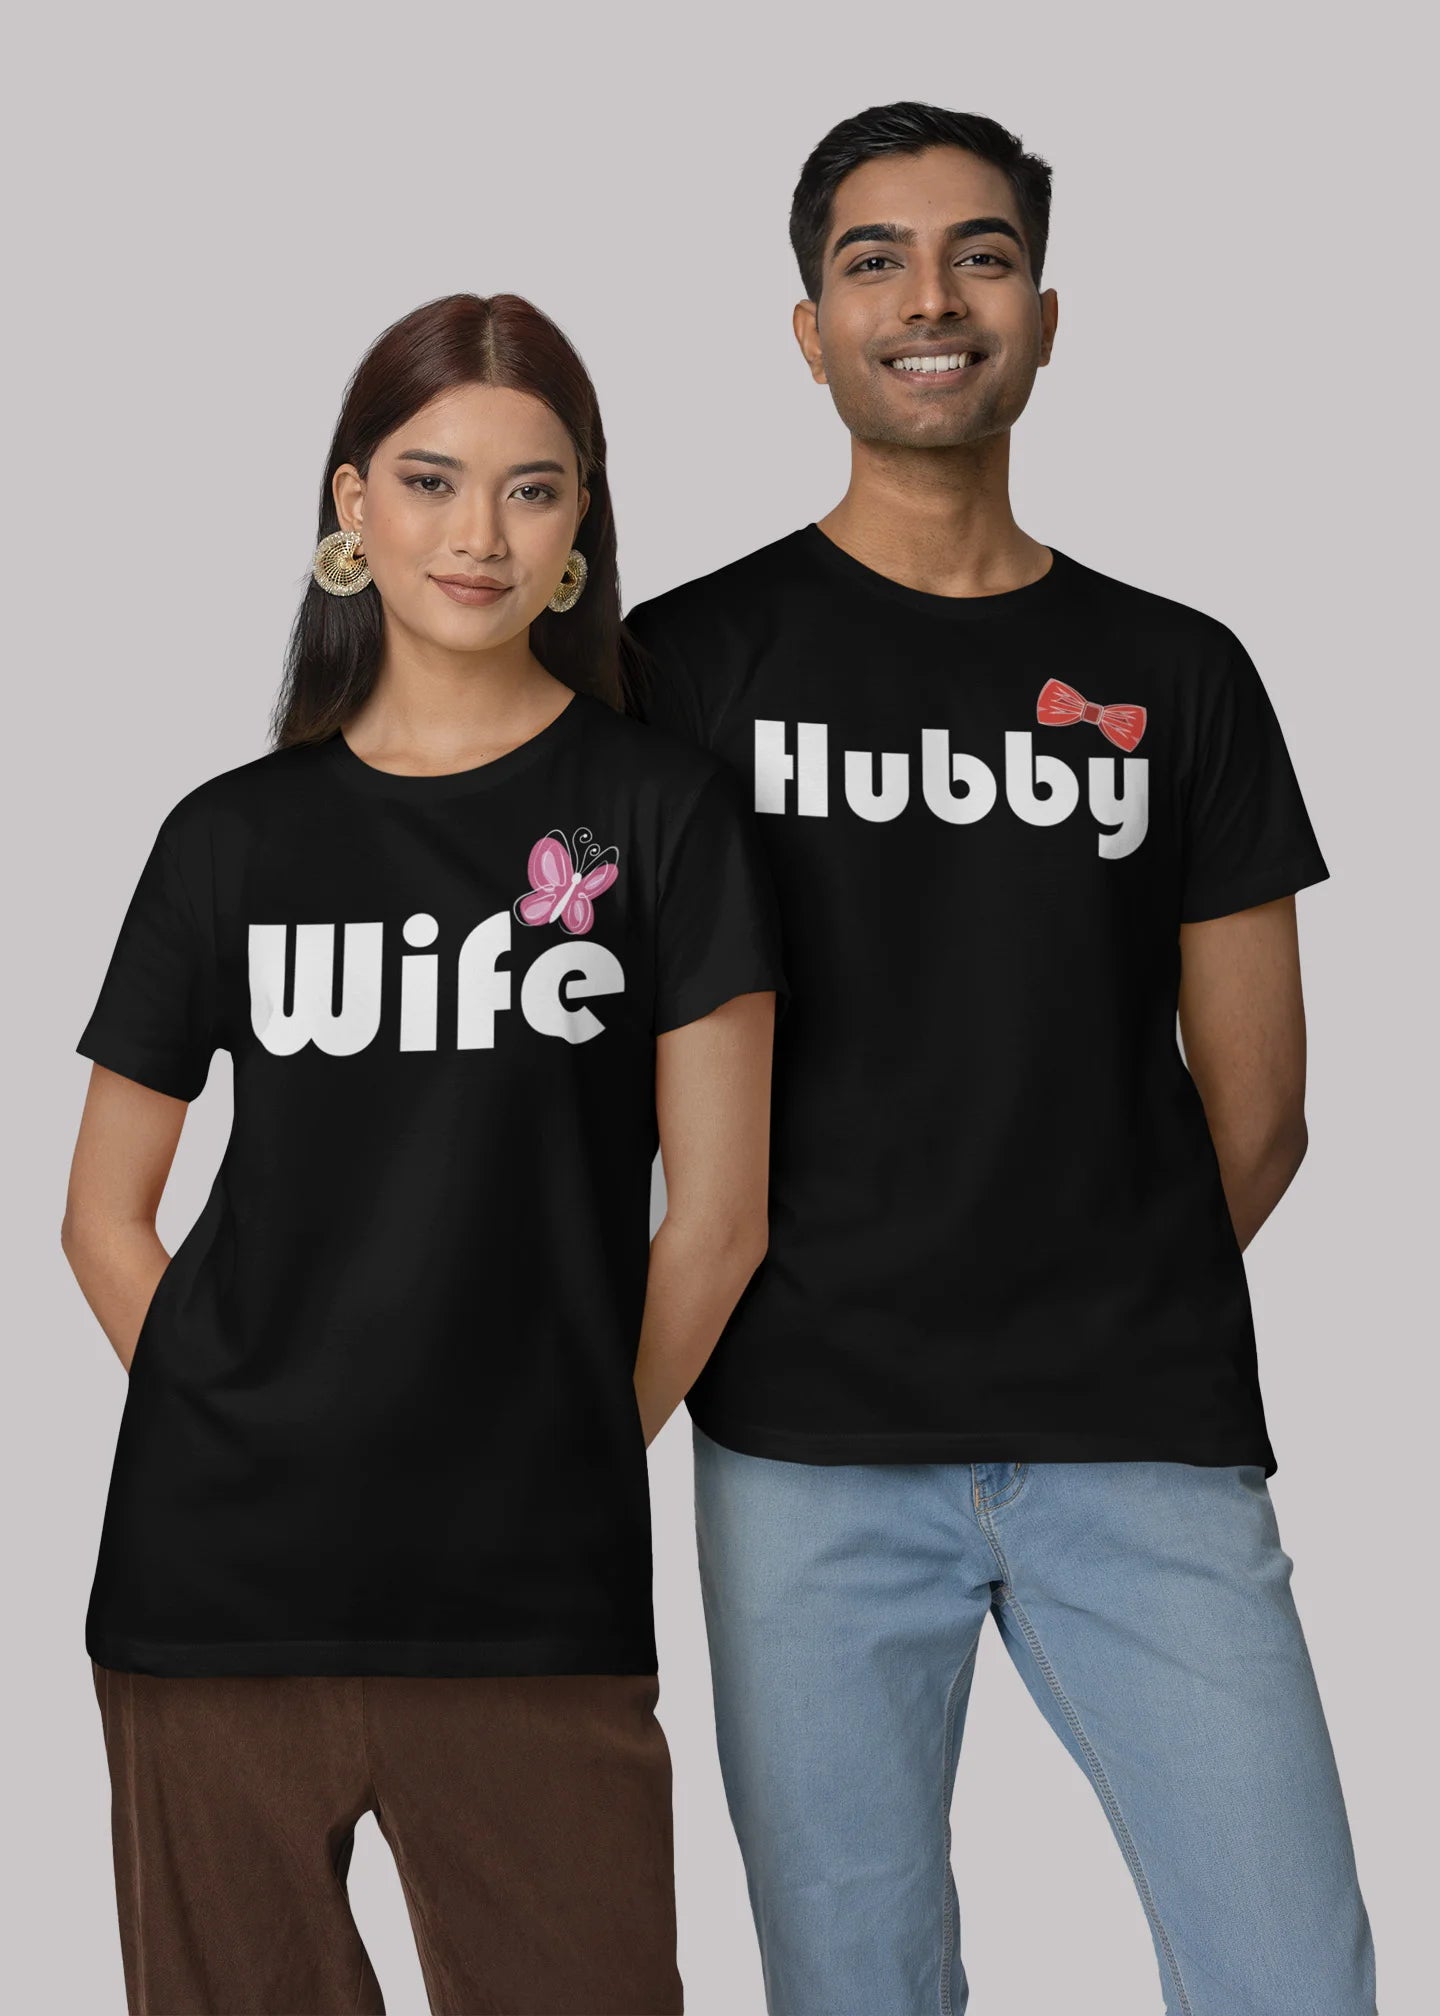 Wife hubby Printed Couple T-shirt